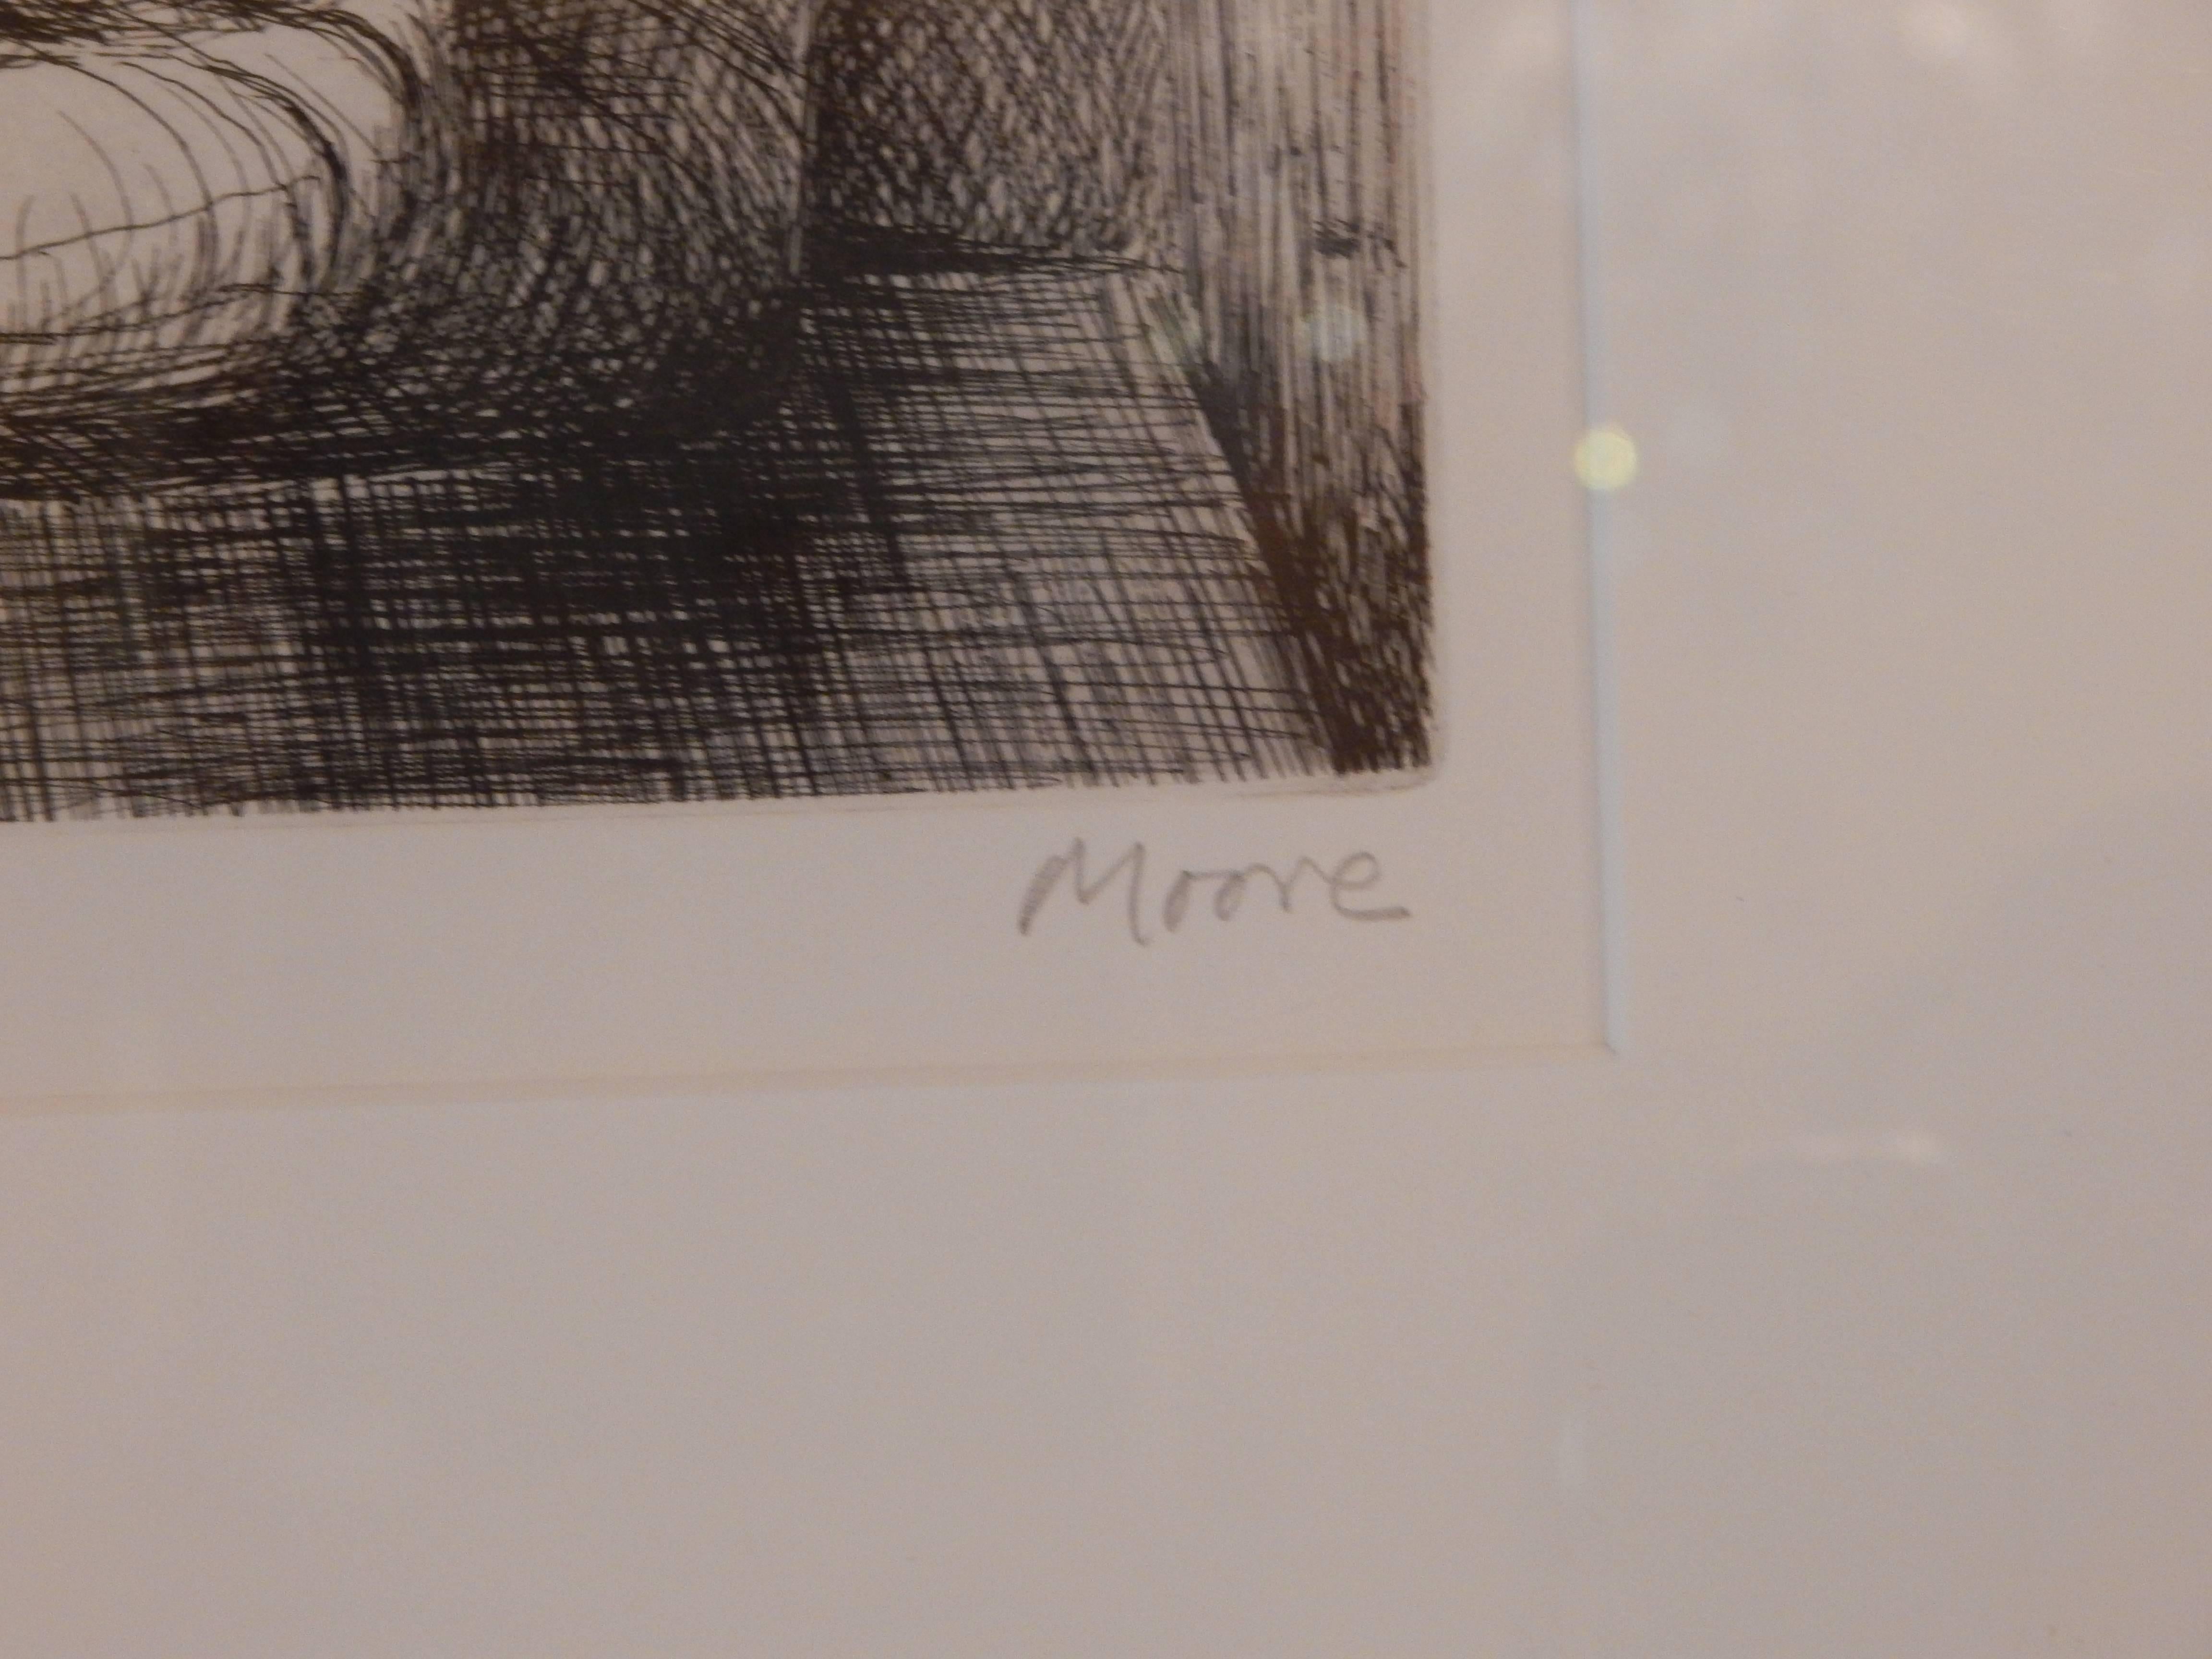 26/50 Framed lithograph, signed Moore.. (Henry Moore)
Image size 10